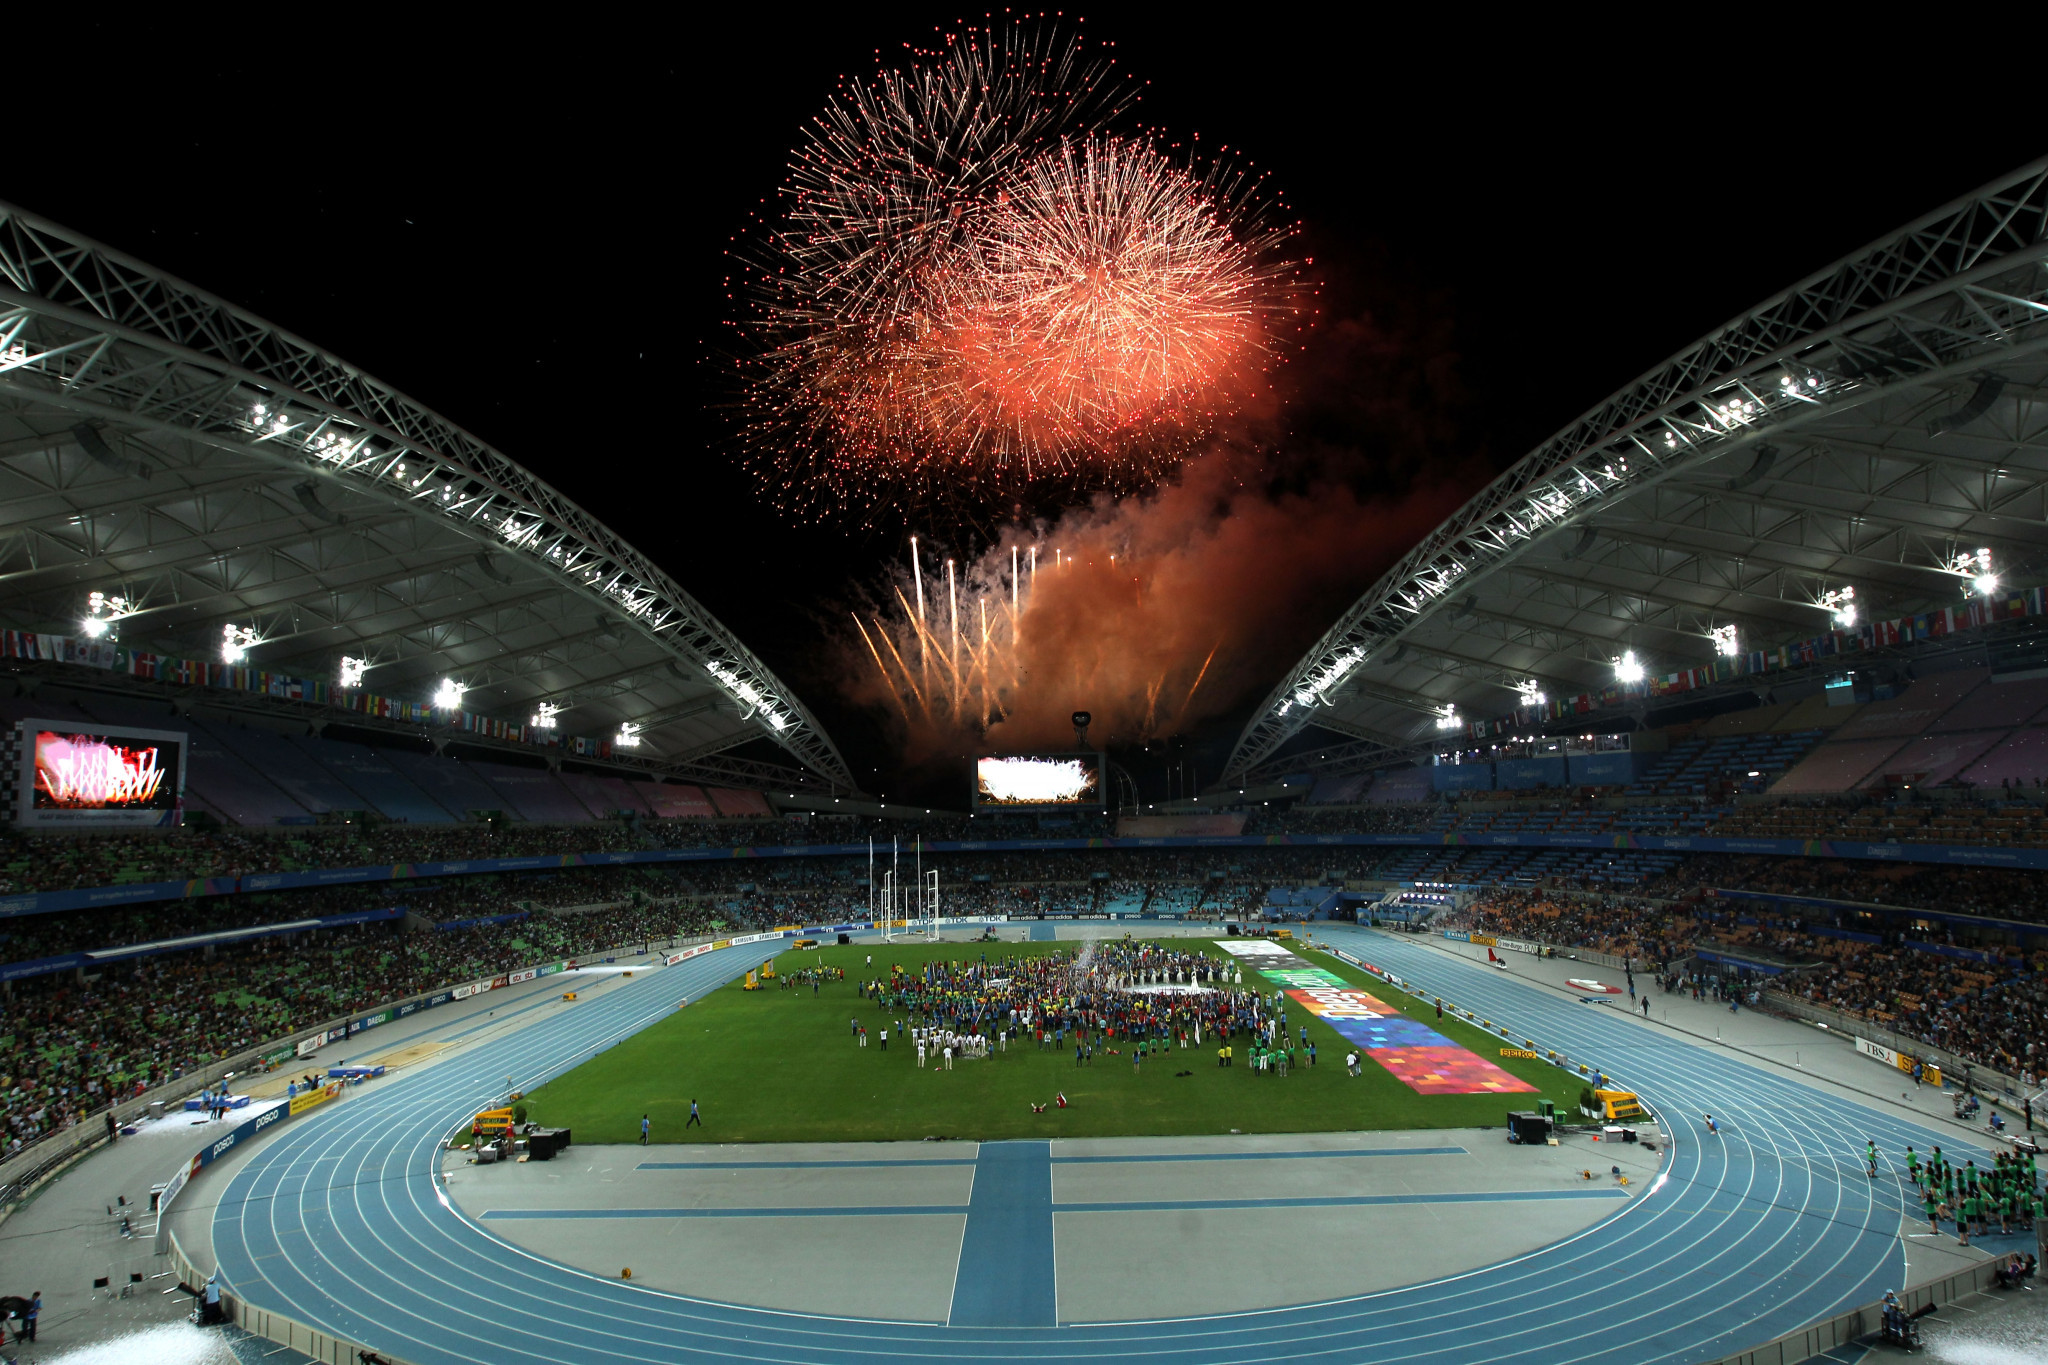 The track and field World Championships were staged by Daegu in 2011 ©Getty Images